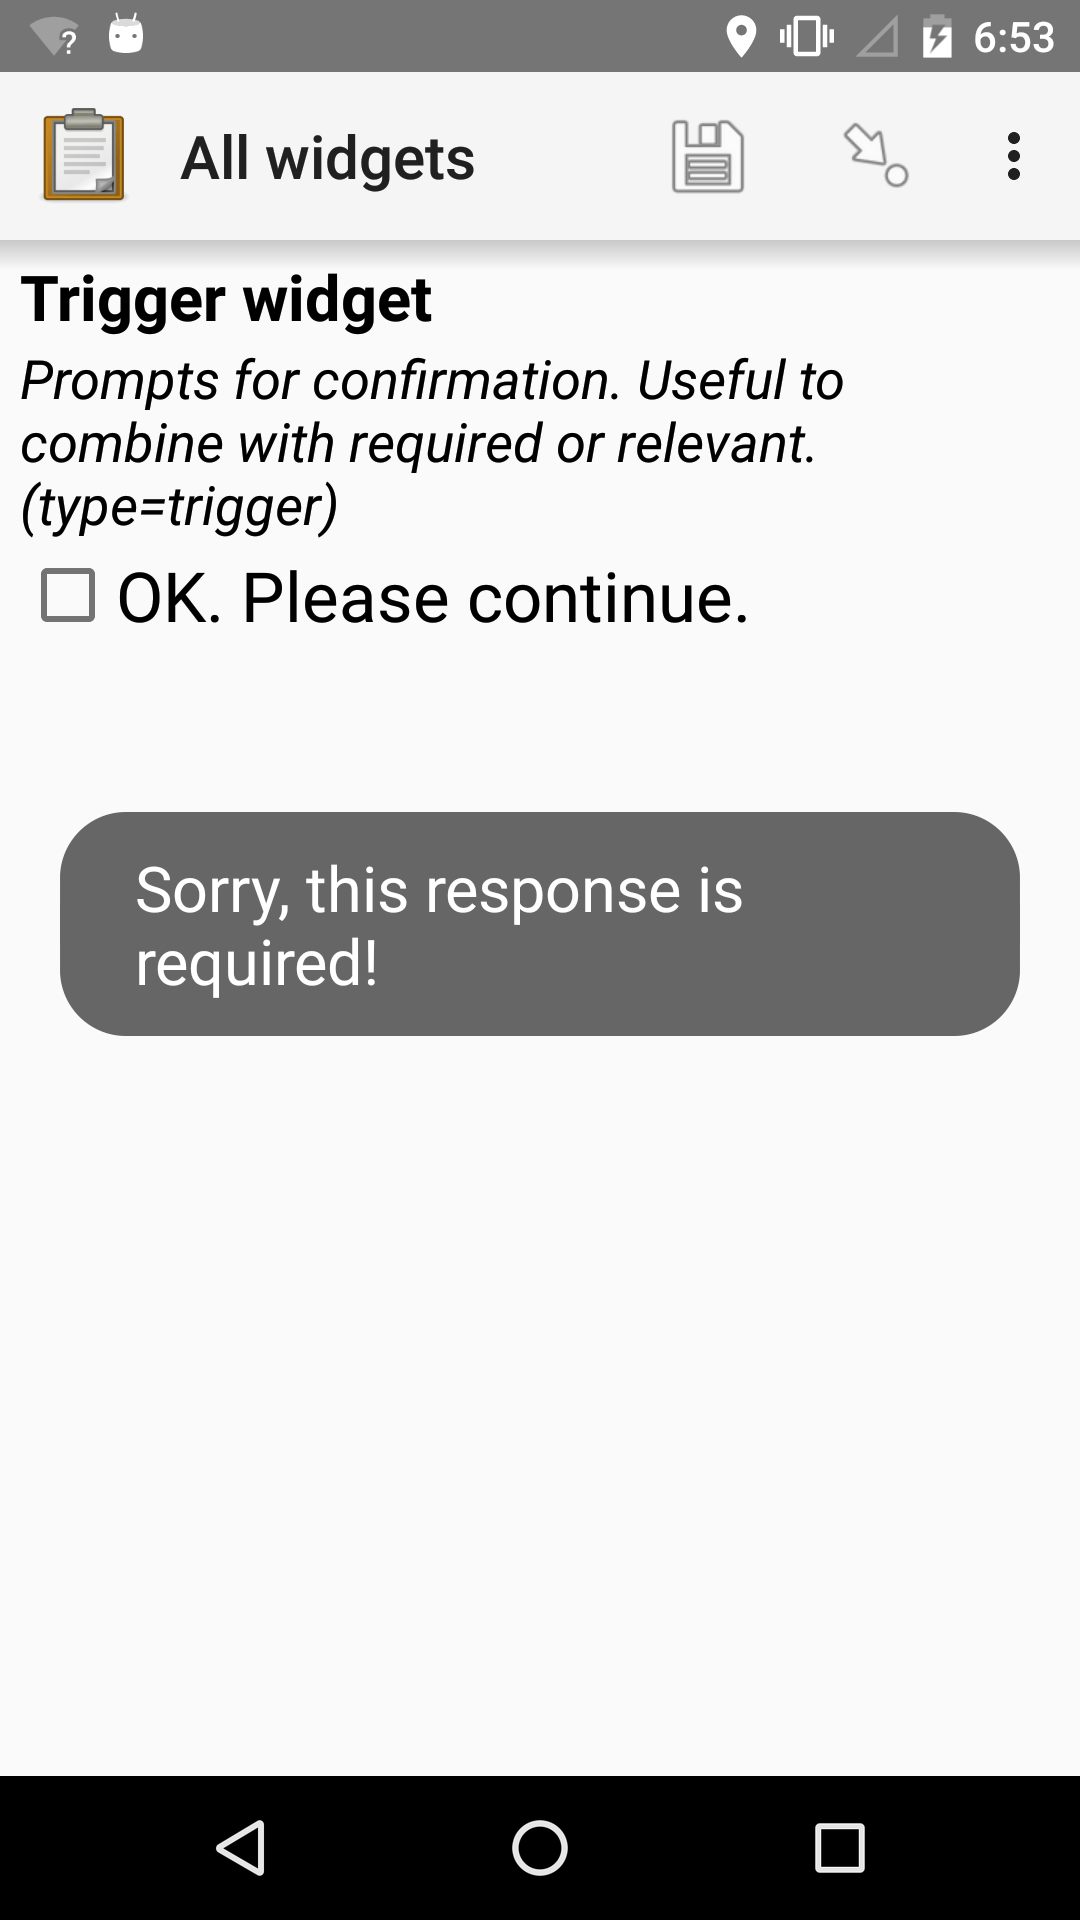 The Trigger widget shown previously. An error text reads, "Sorry, this response is required."